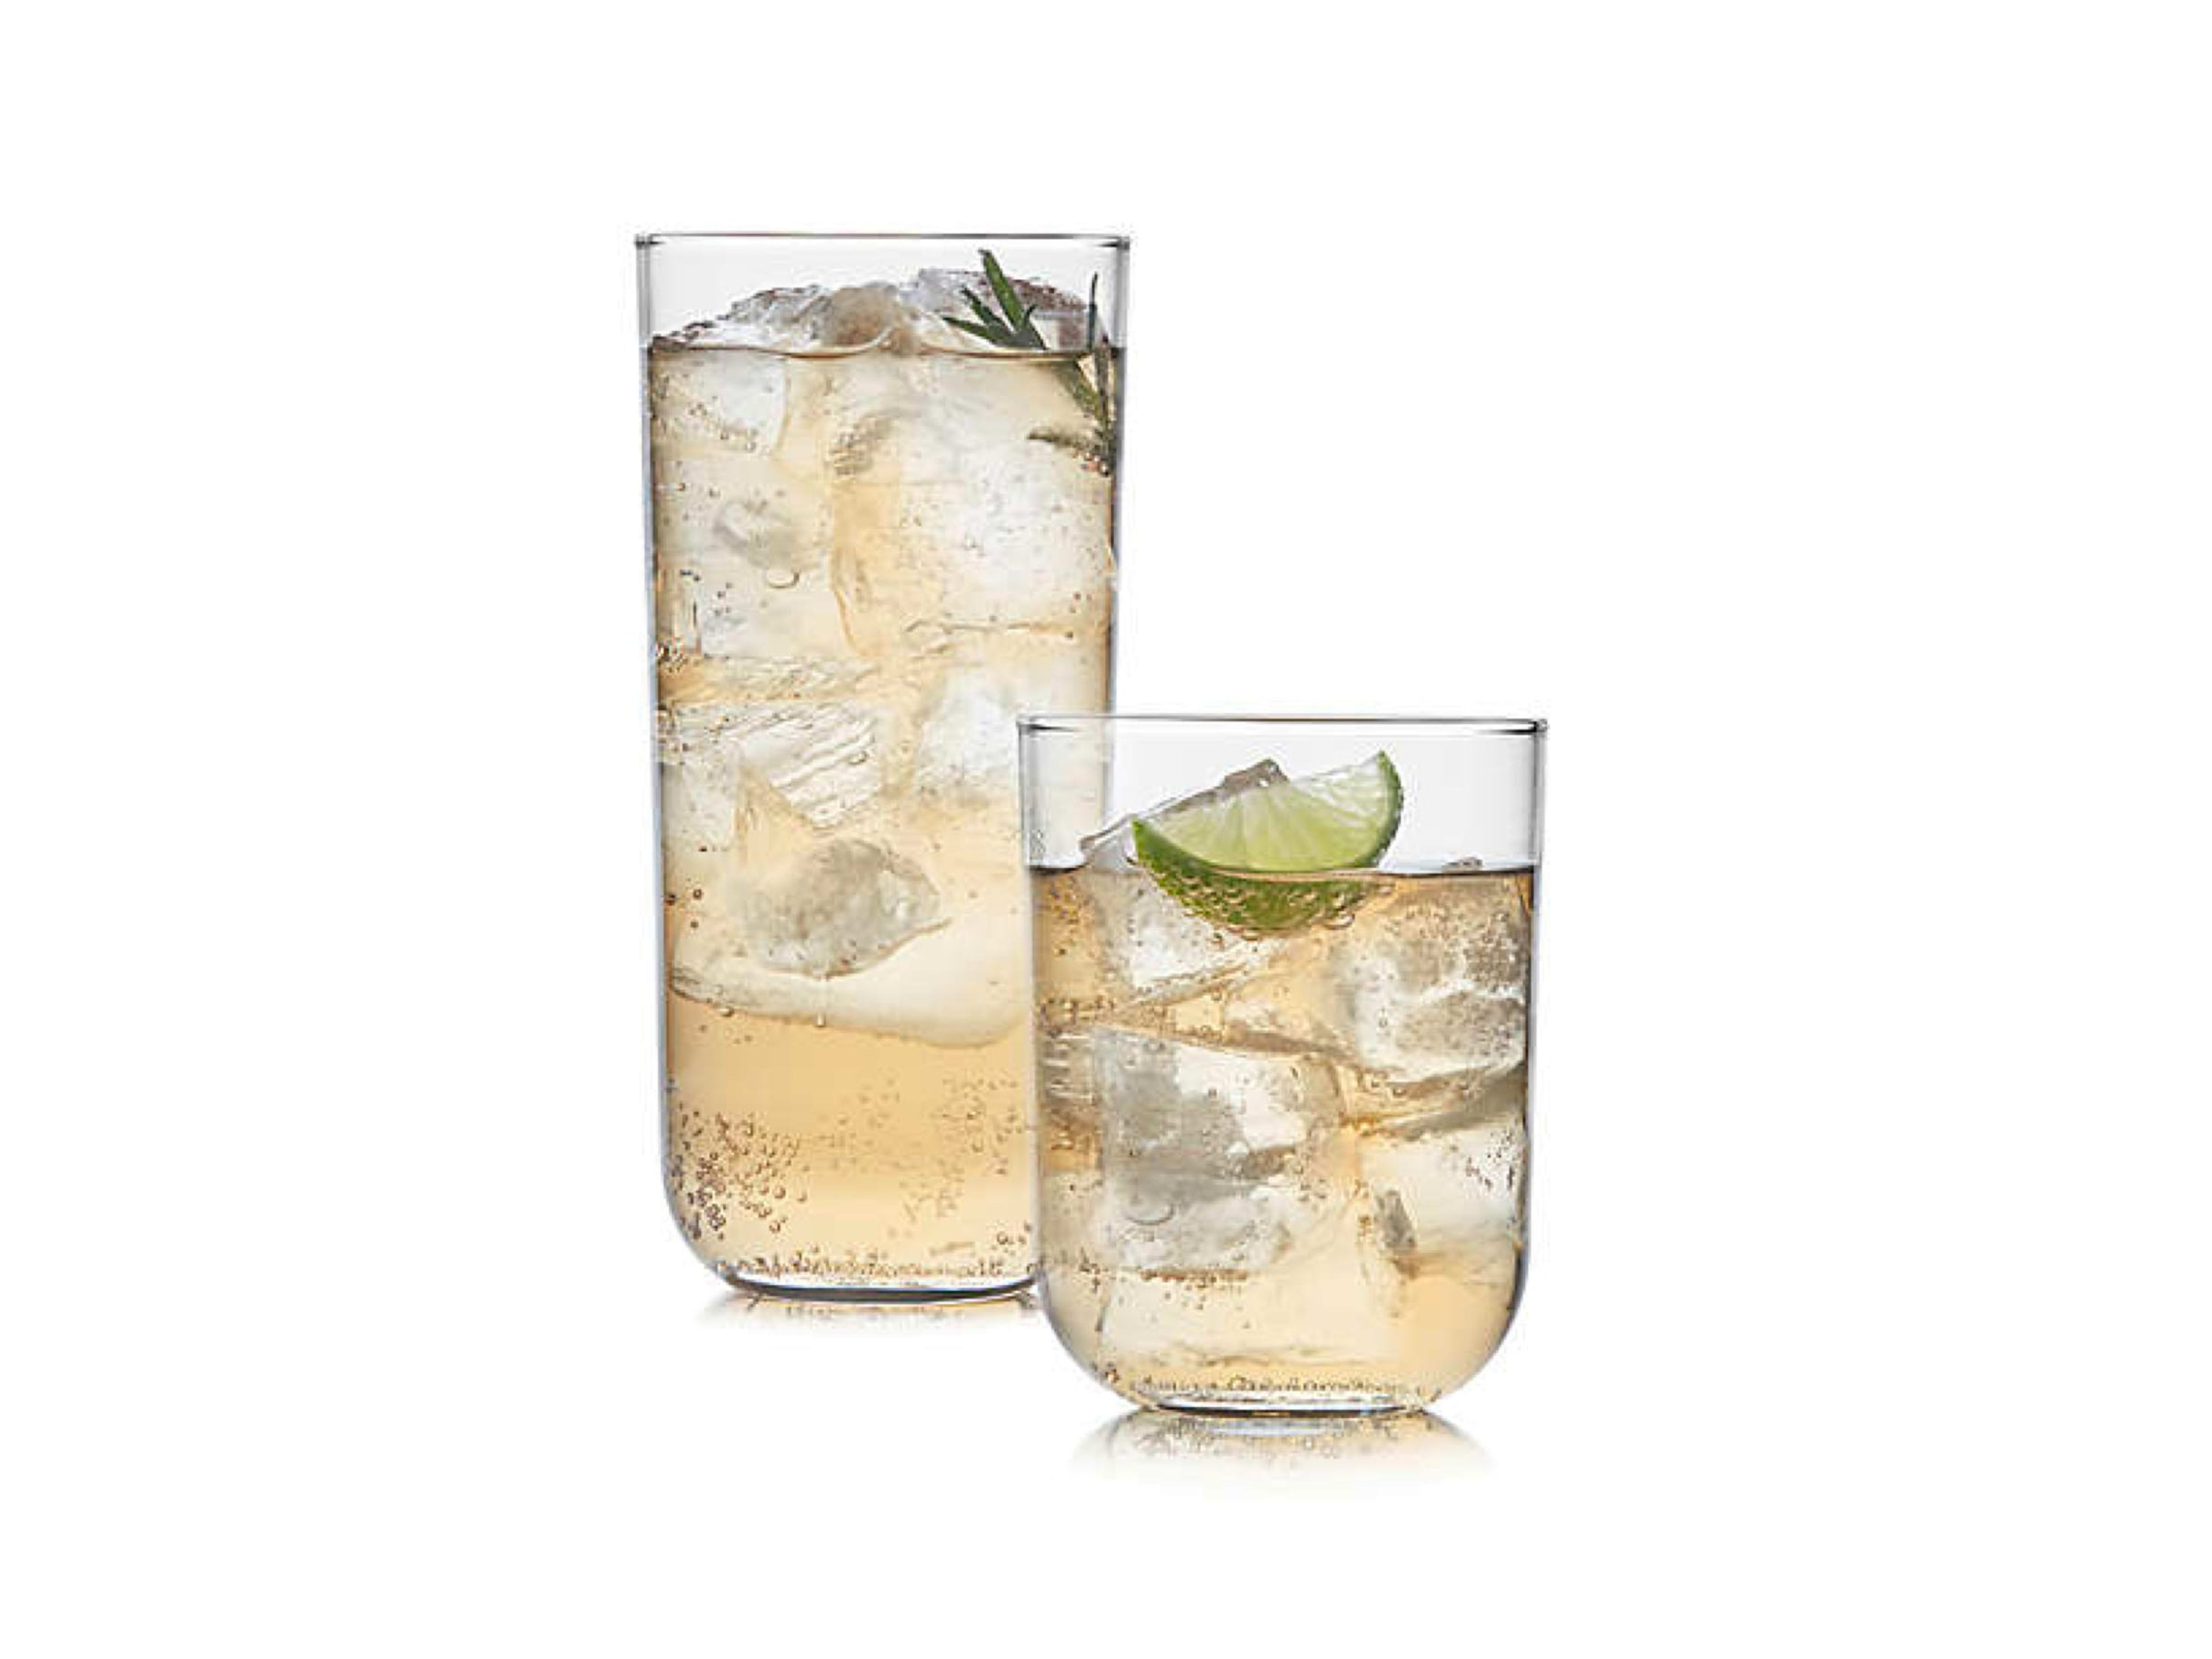 27 Stylish Drinking Glasses To Upgrade Your Dinner Table image